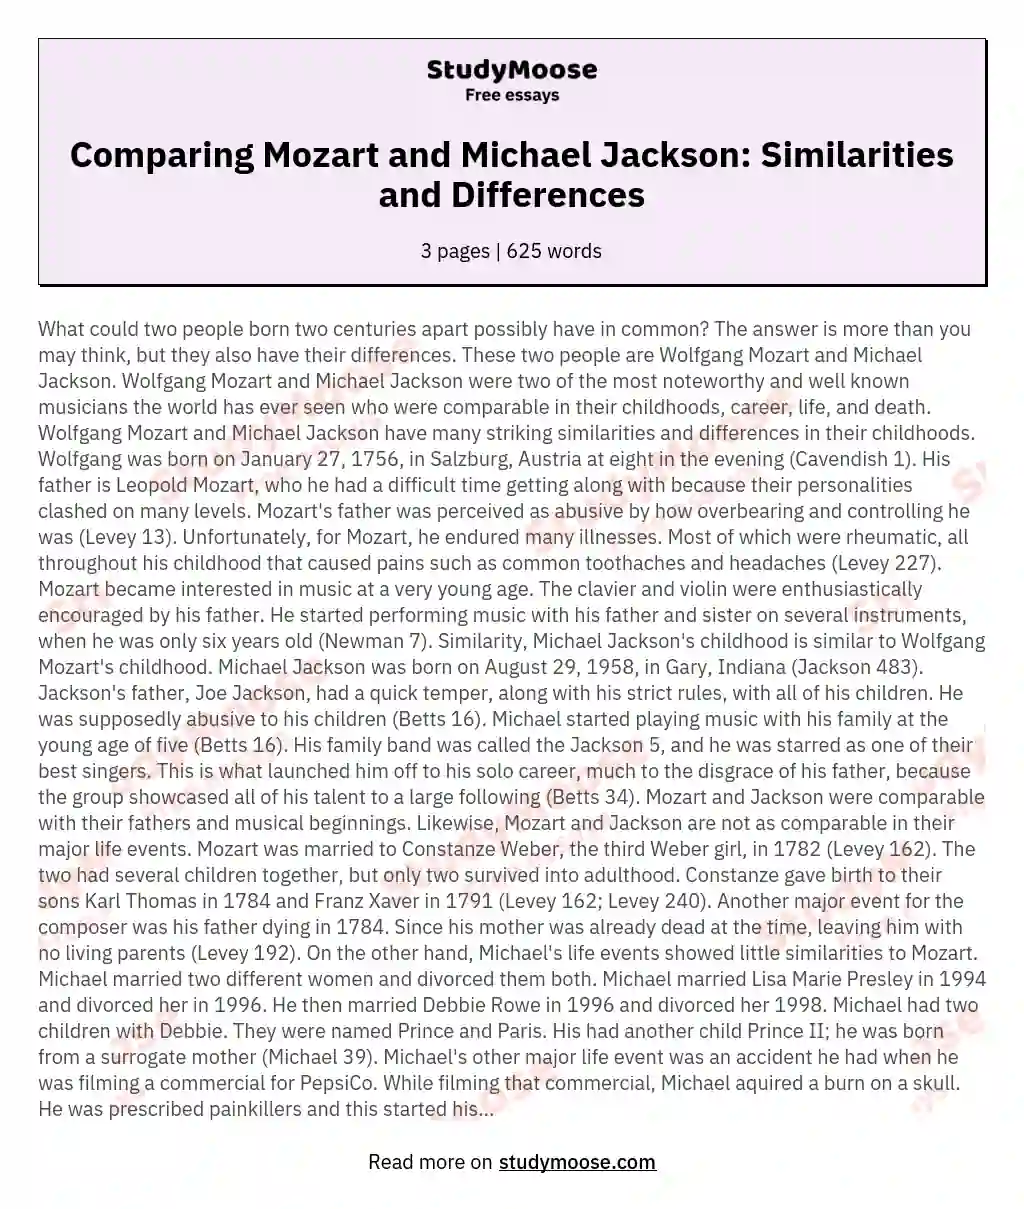 A Comparison of the Similarities and Differences Between Wolfgang Mozart and Michael Jackson